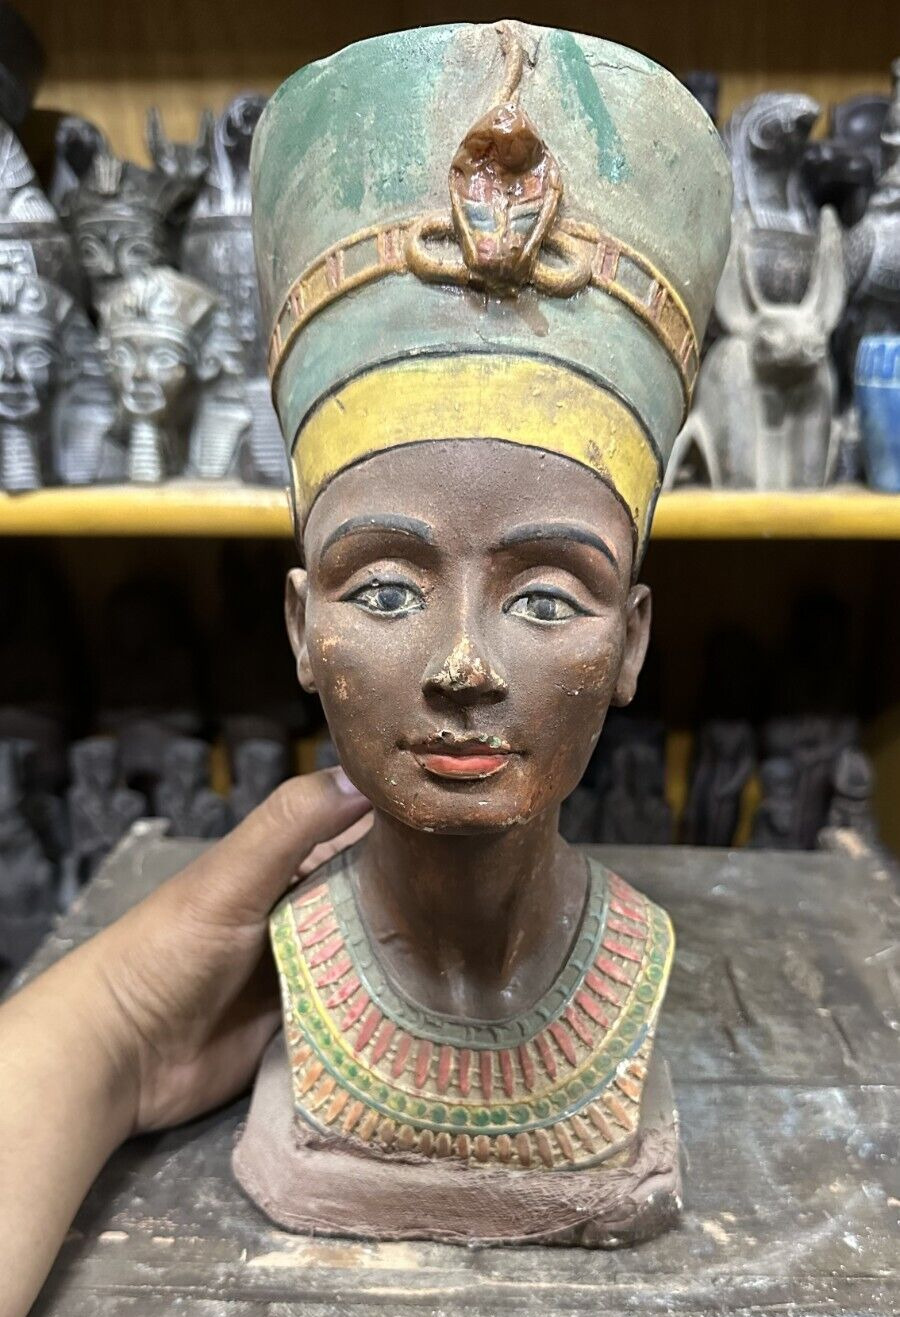 GET NOW ANCIENT PHARAONIC QUEENS ANTIQUES And Own The Rare Queen Nefertiti Head